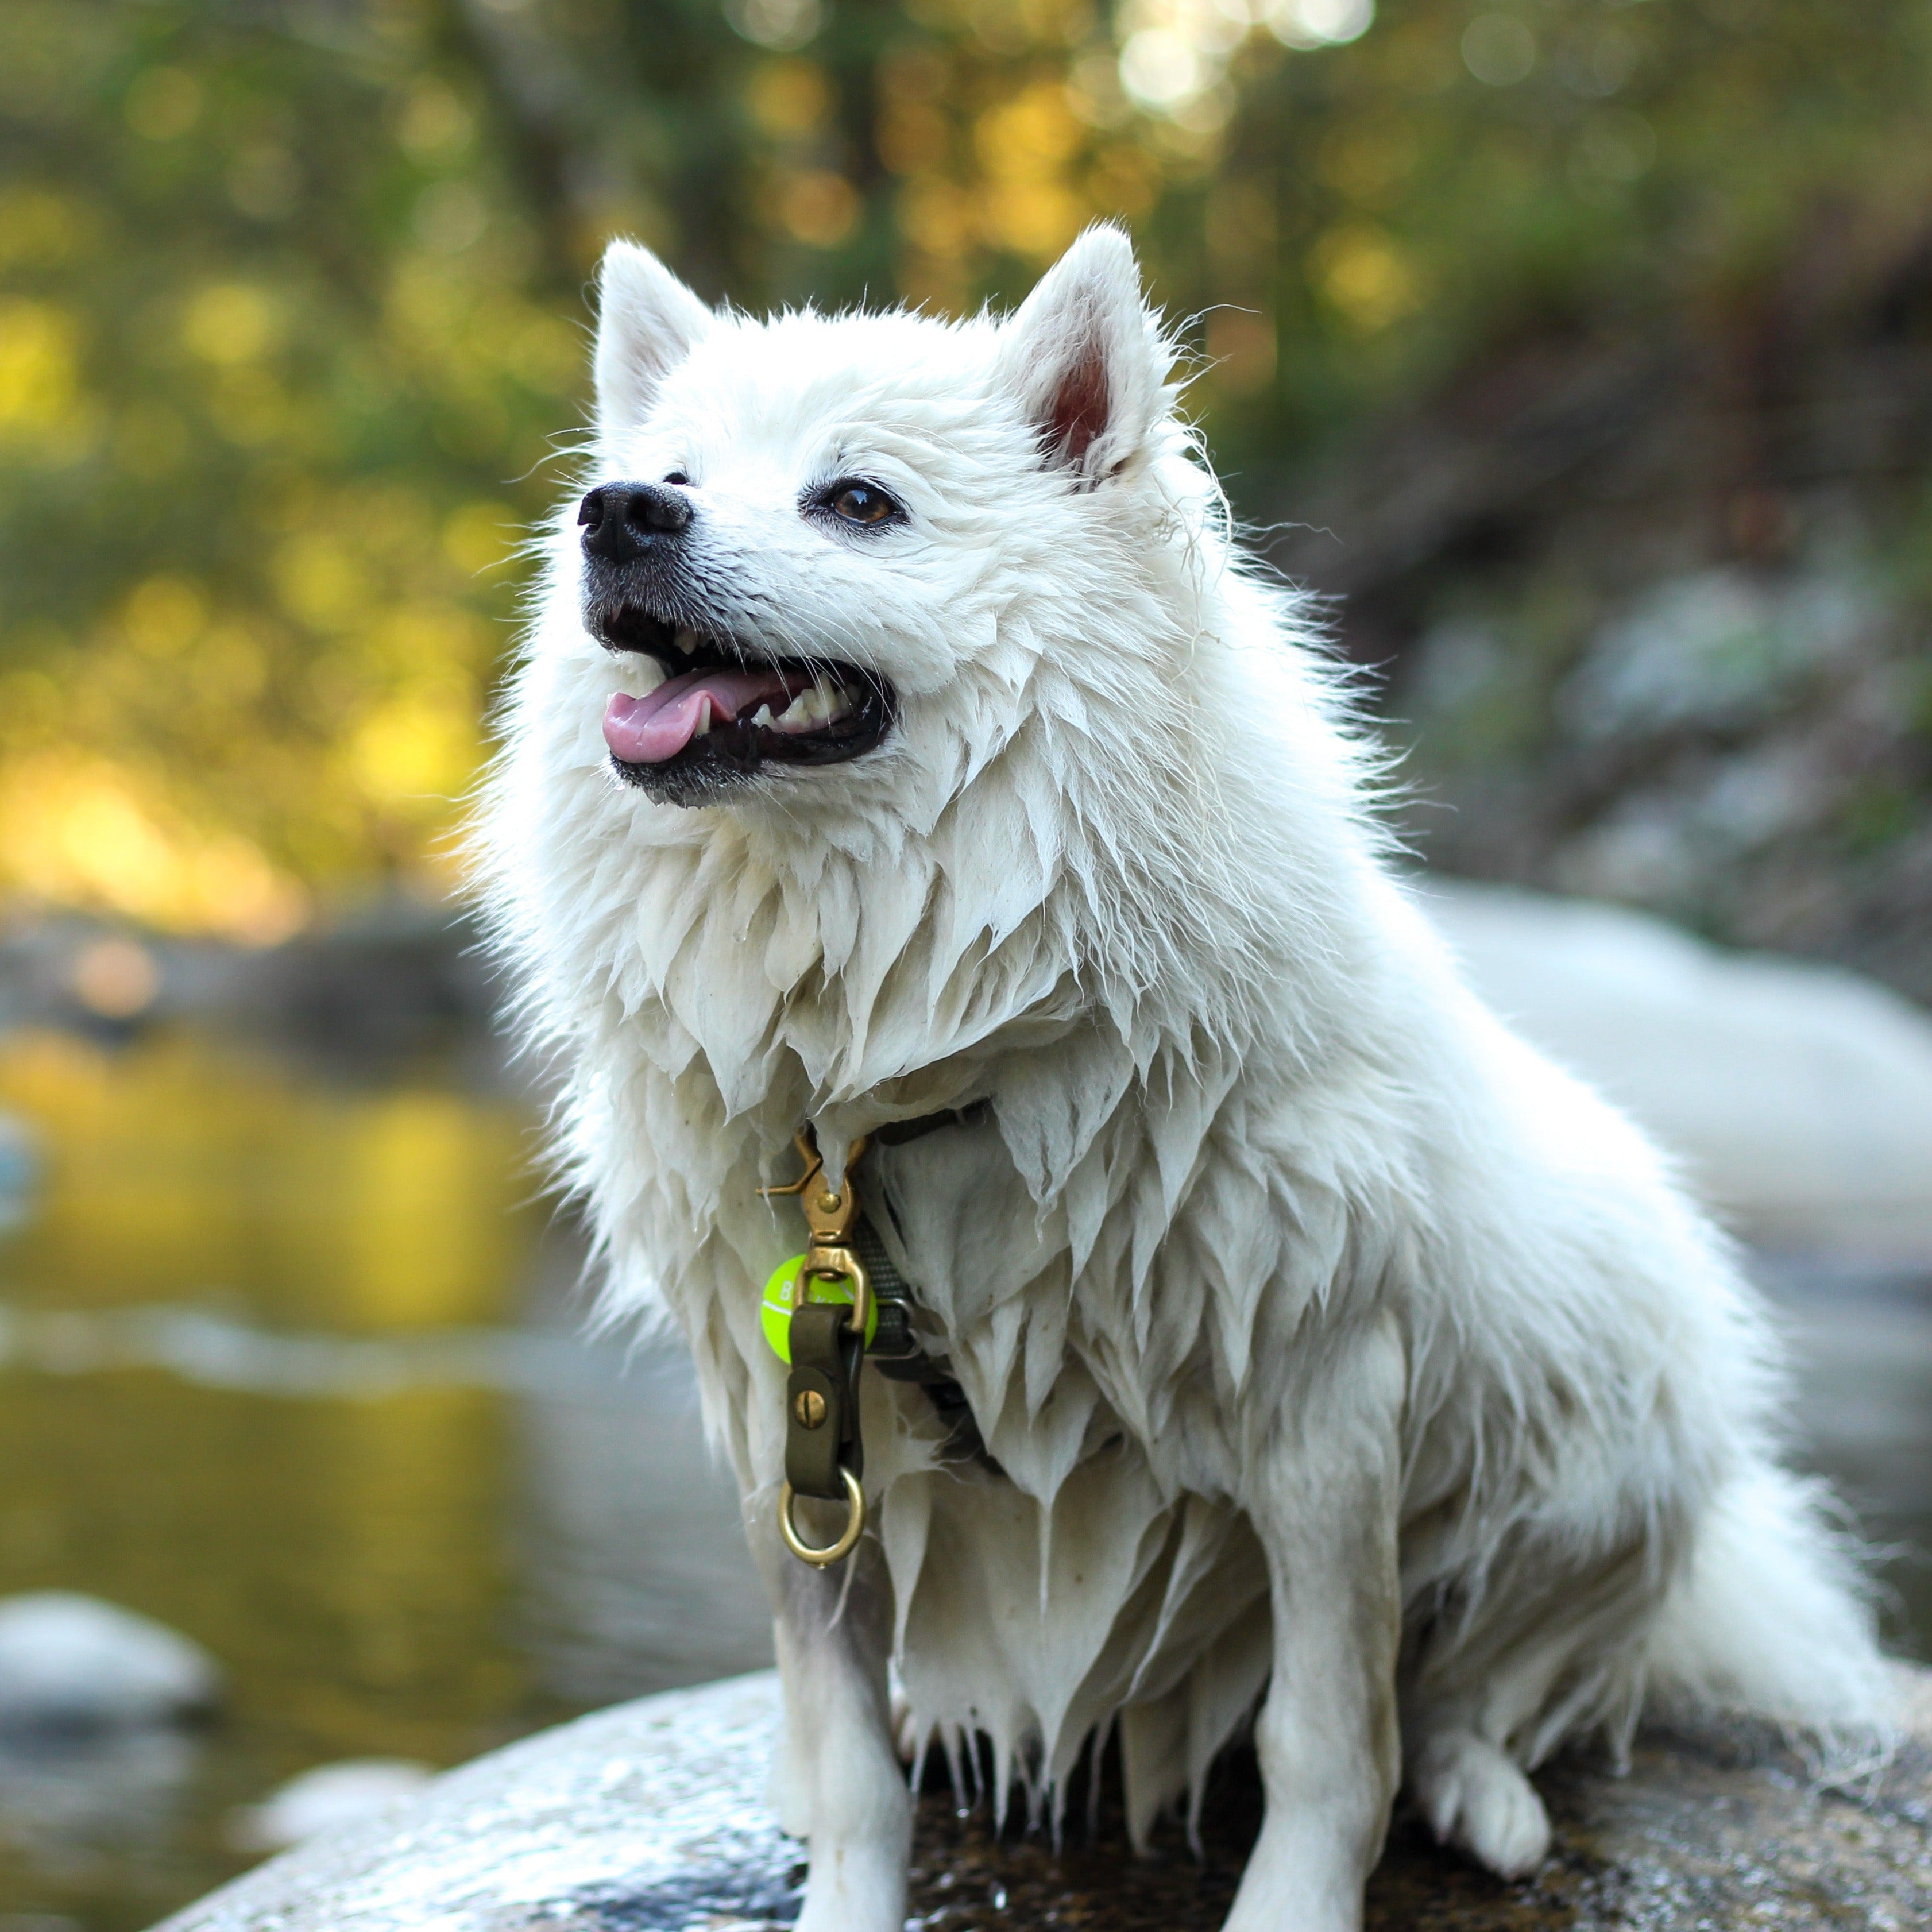 Eskimo Dog having fun in the river wearing an Olive Colored Grab Tab